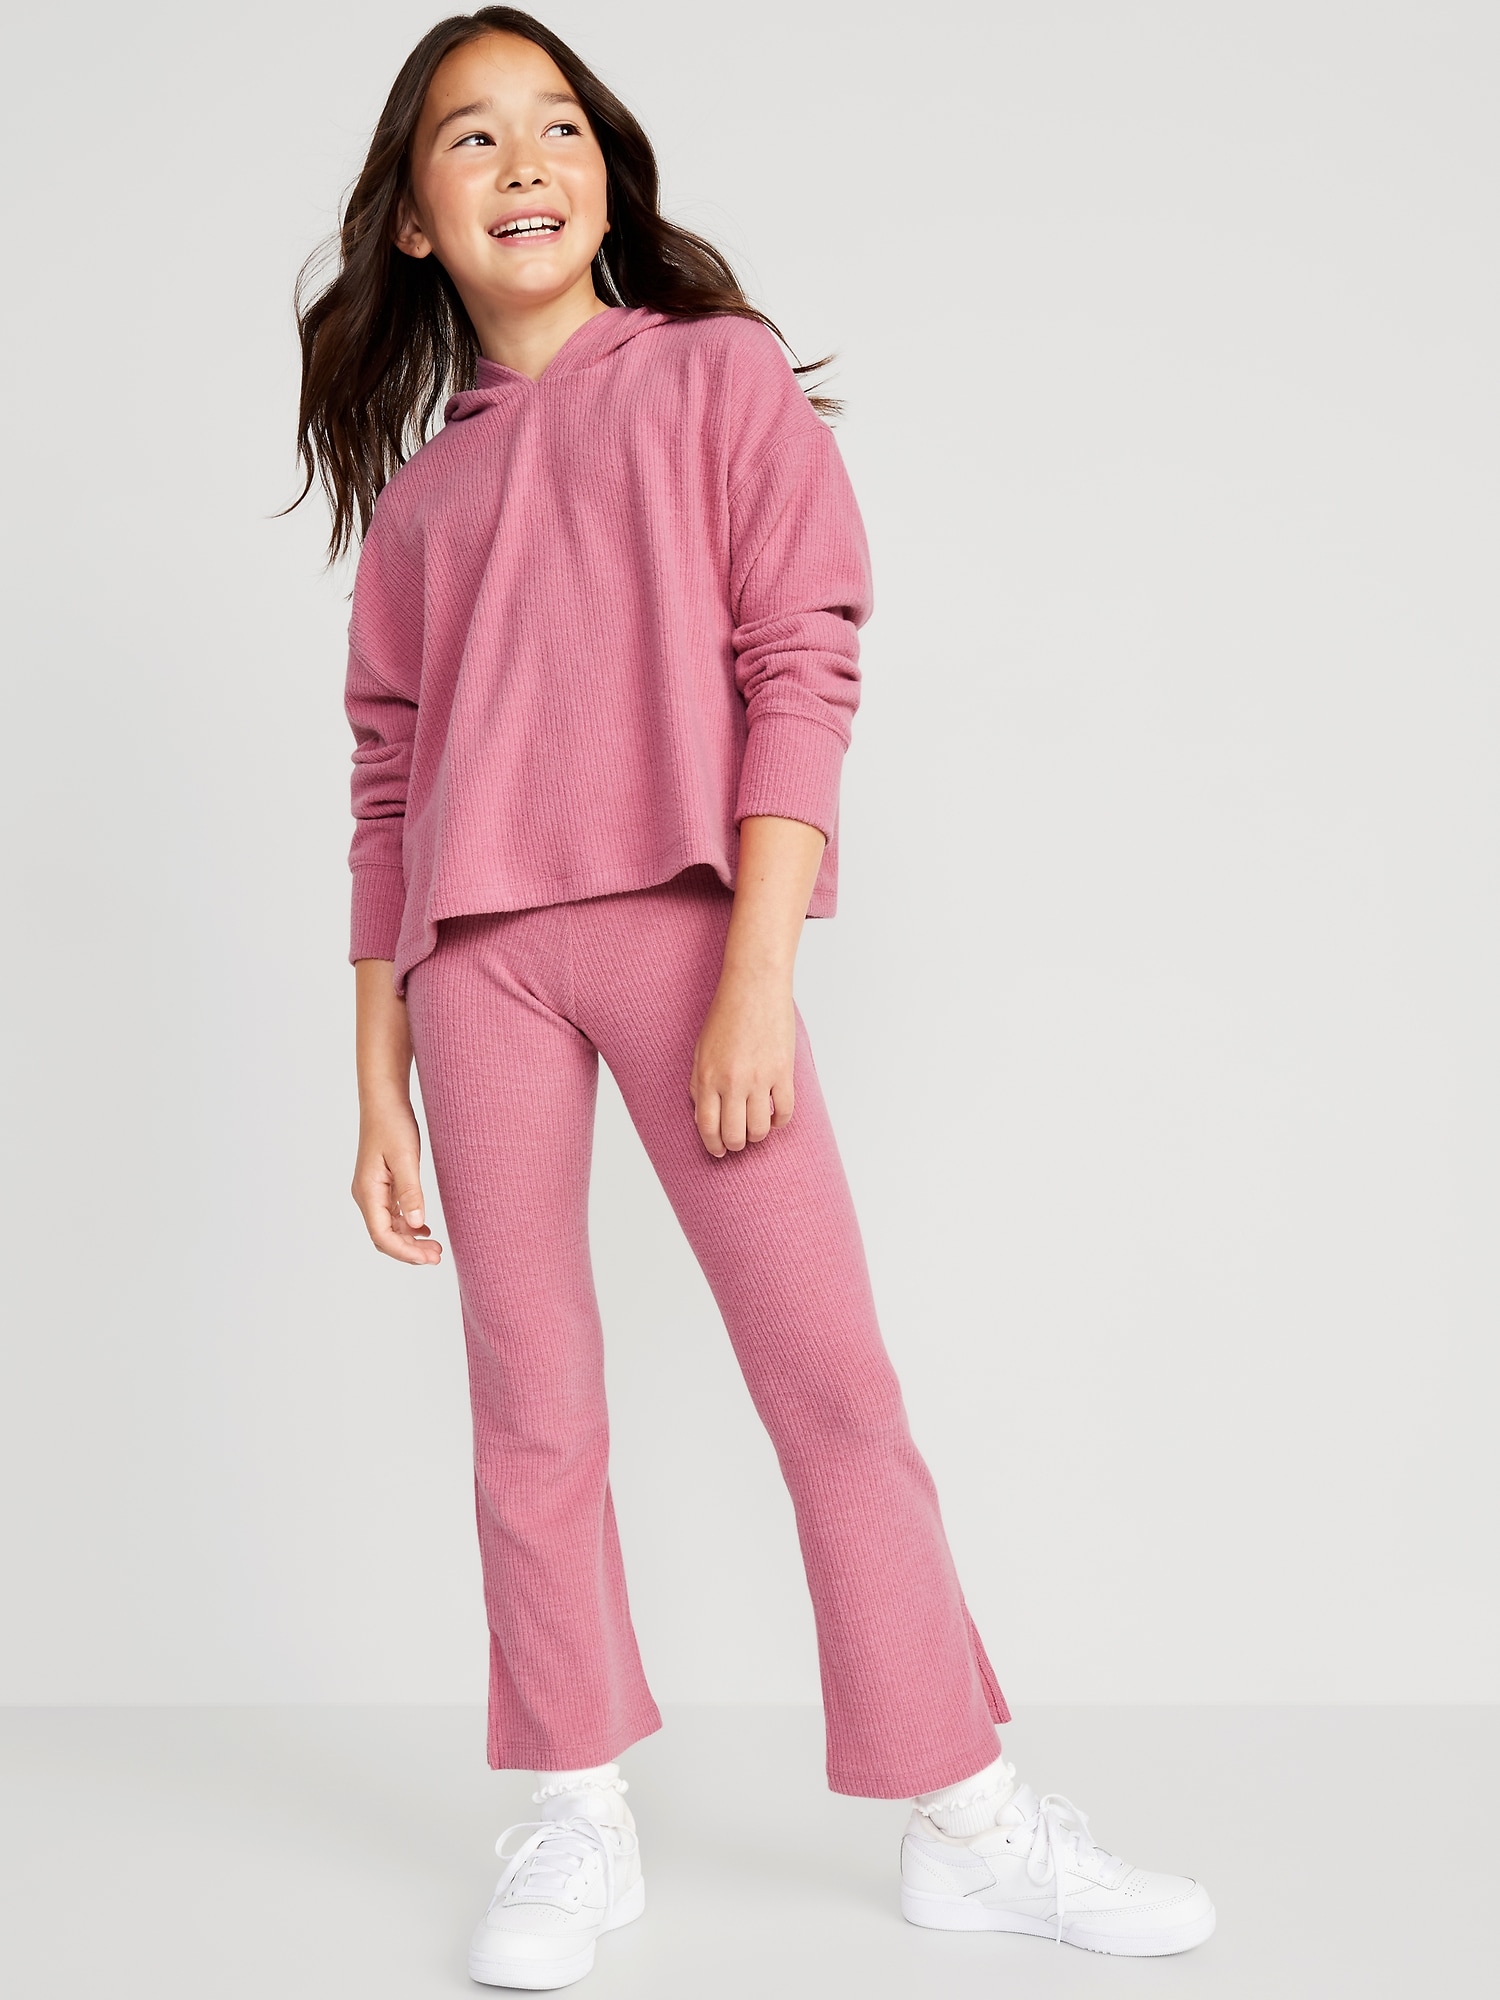 Plush Cozy-Knit Hoodie & Side-Slit Flare Pants Set for Girls | Old Navy